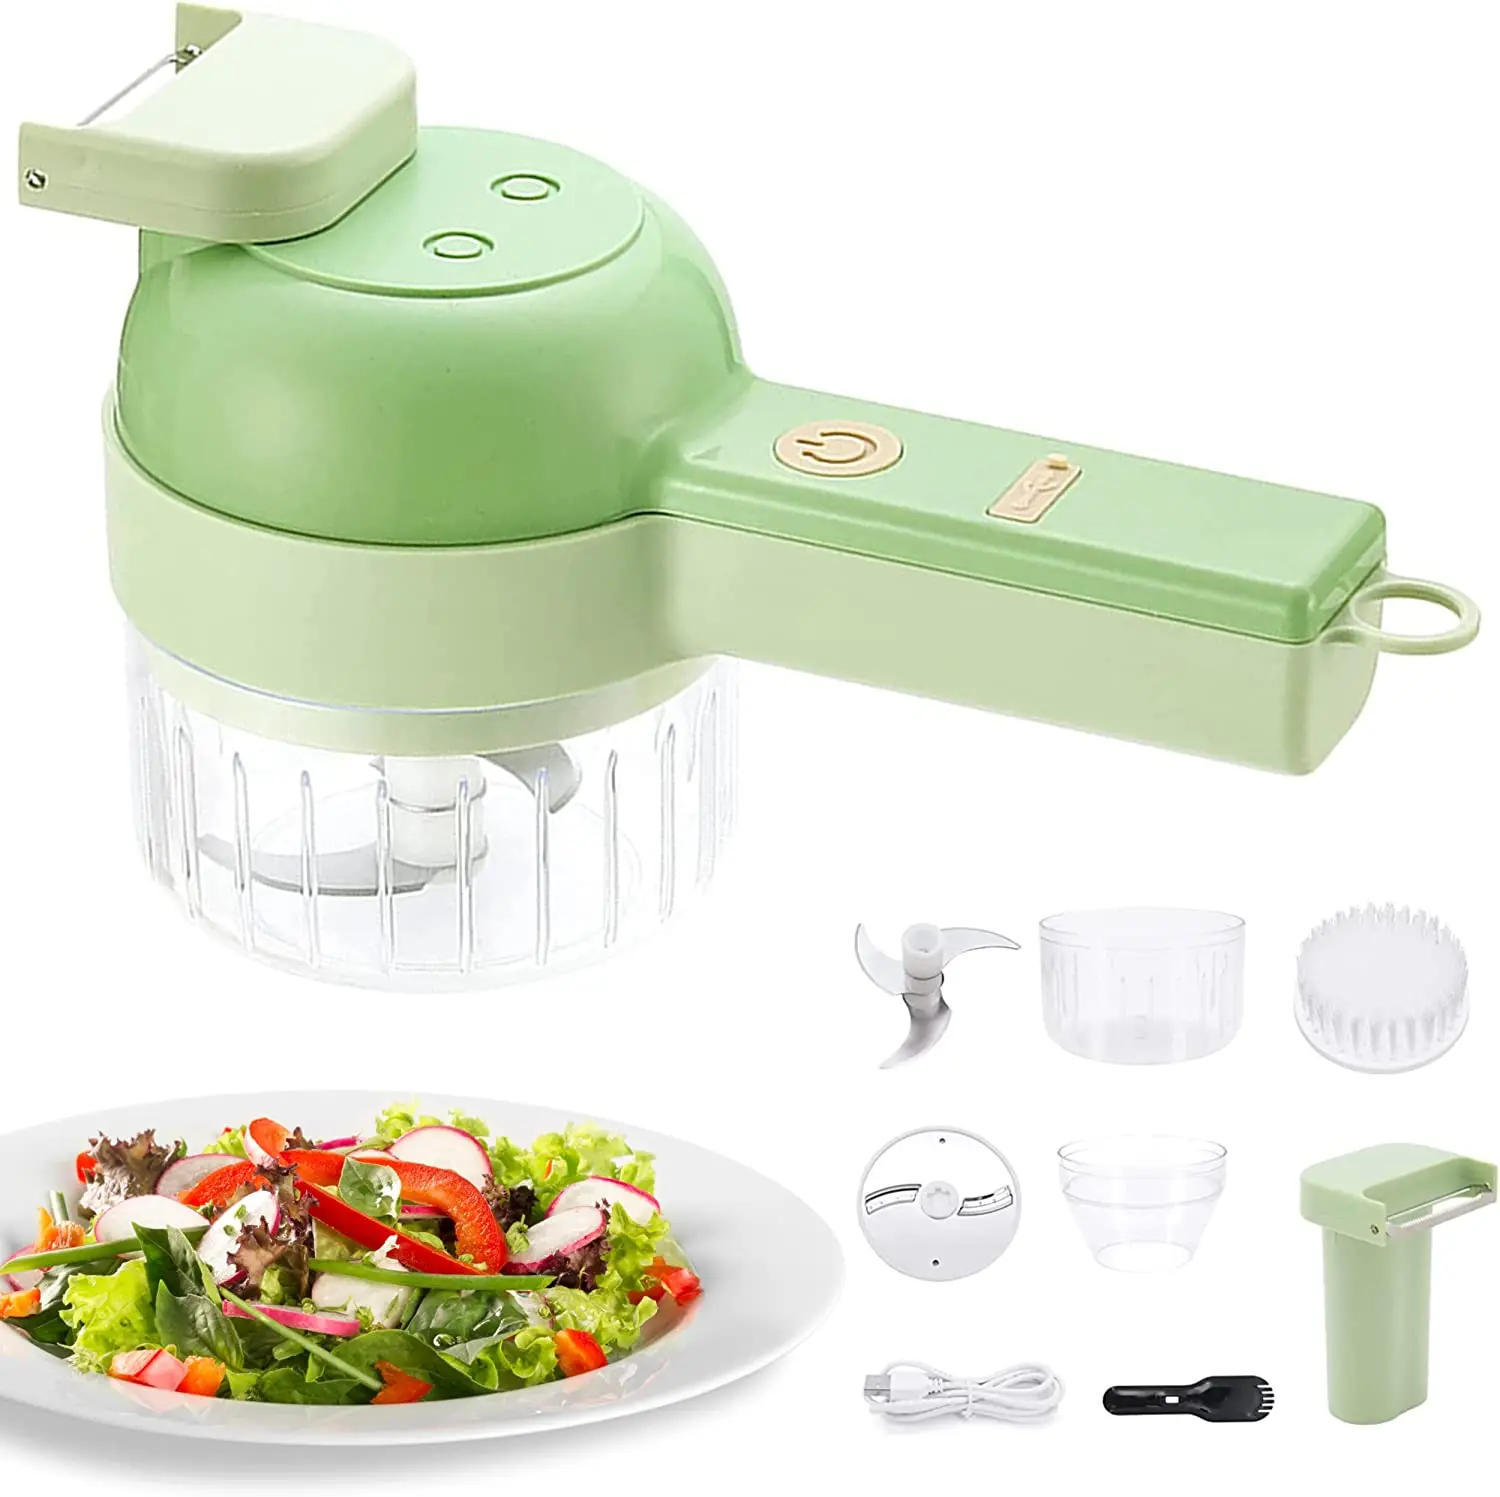 4-in-1 Portable Electric Vegetable Cutter Set: A wireless food processor with stainless steel blades, designed for effortless chopping of garlic, chili pepper, onion, ginger, celery, and meat. Streamline your kitchen prep with this versatile and innovative culinary tool